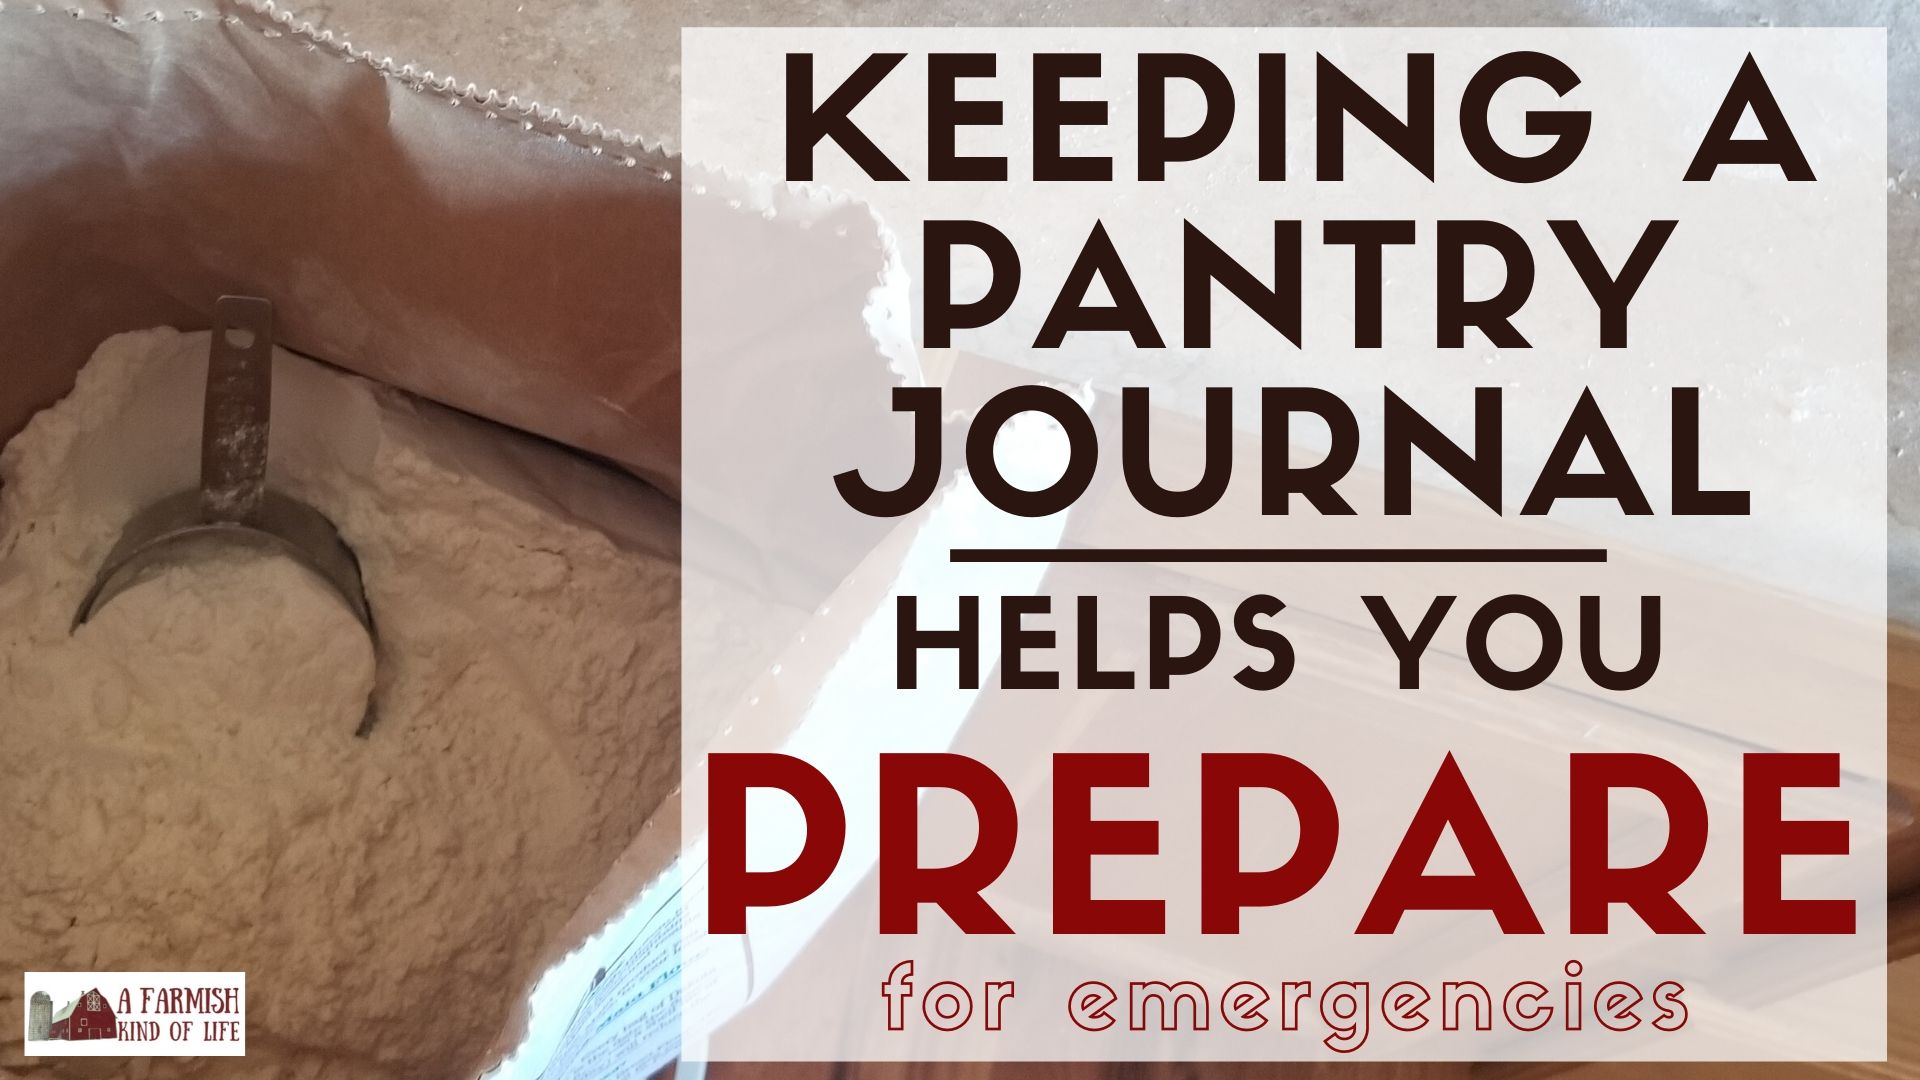 82: Keeping a Pantry Journal Helps you Prepare for Emergencies